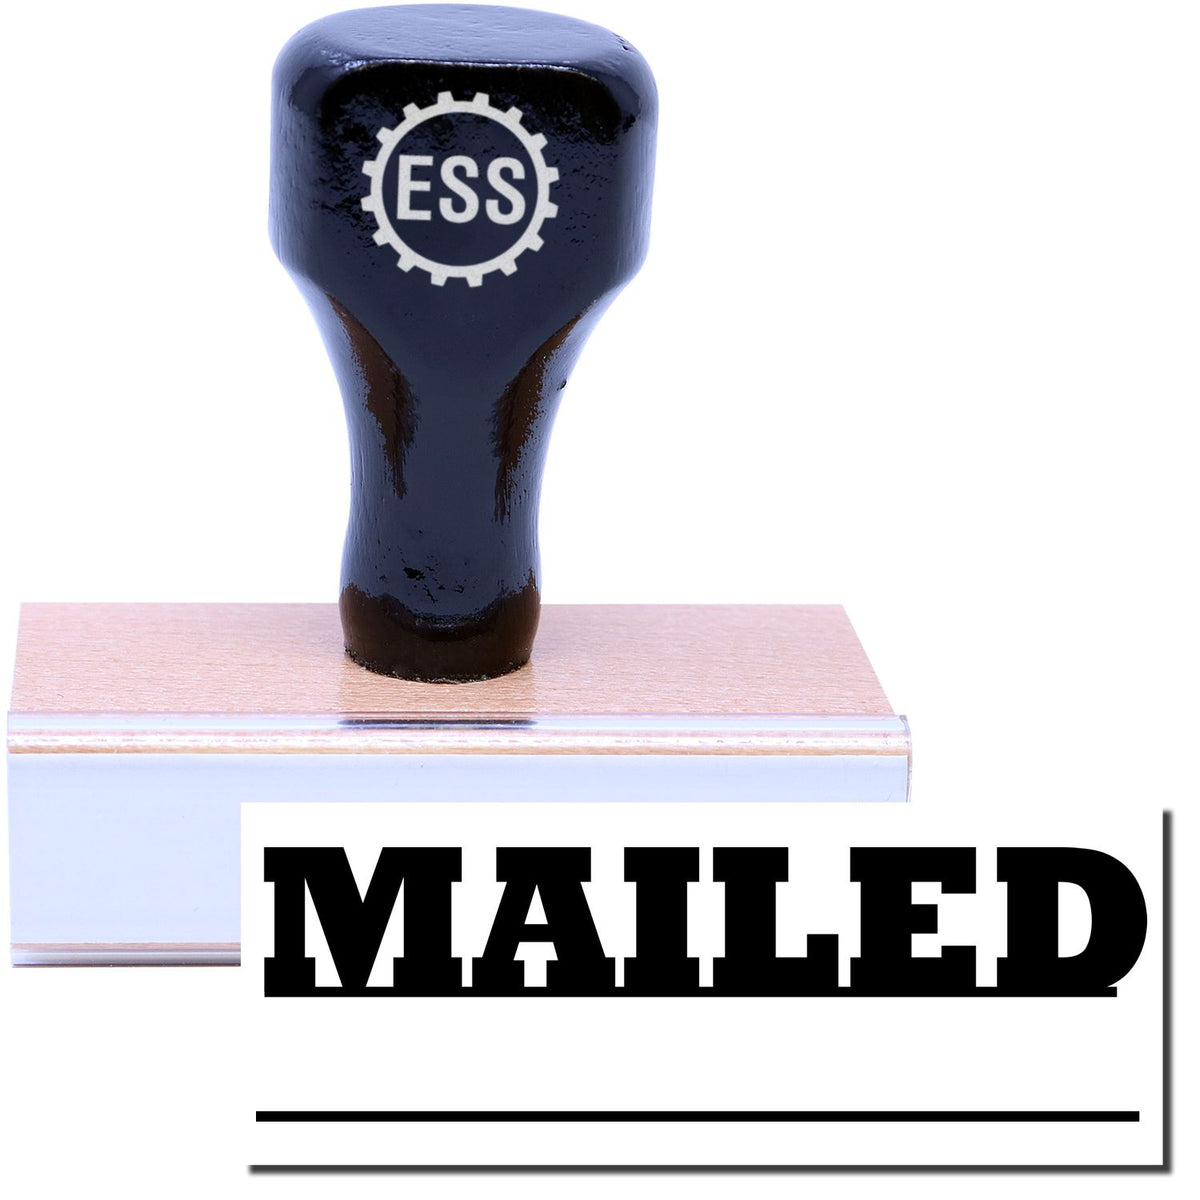 A stock office rubber stamp with a stamped image showing how the text &quot;MAILED&quot; in a large font with a date line underneath the text is displayed after stamping.